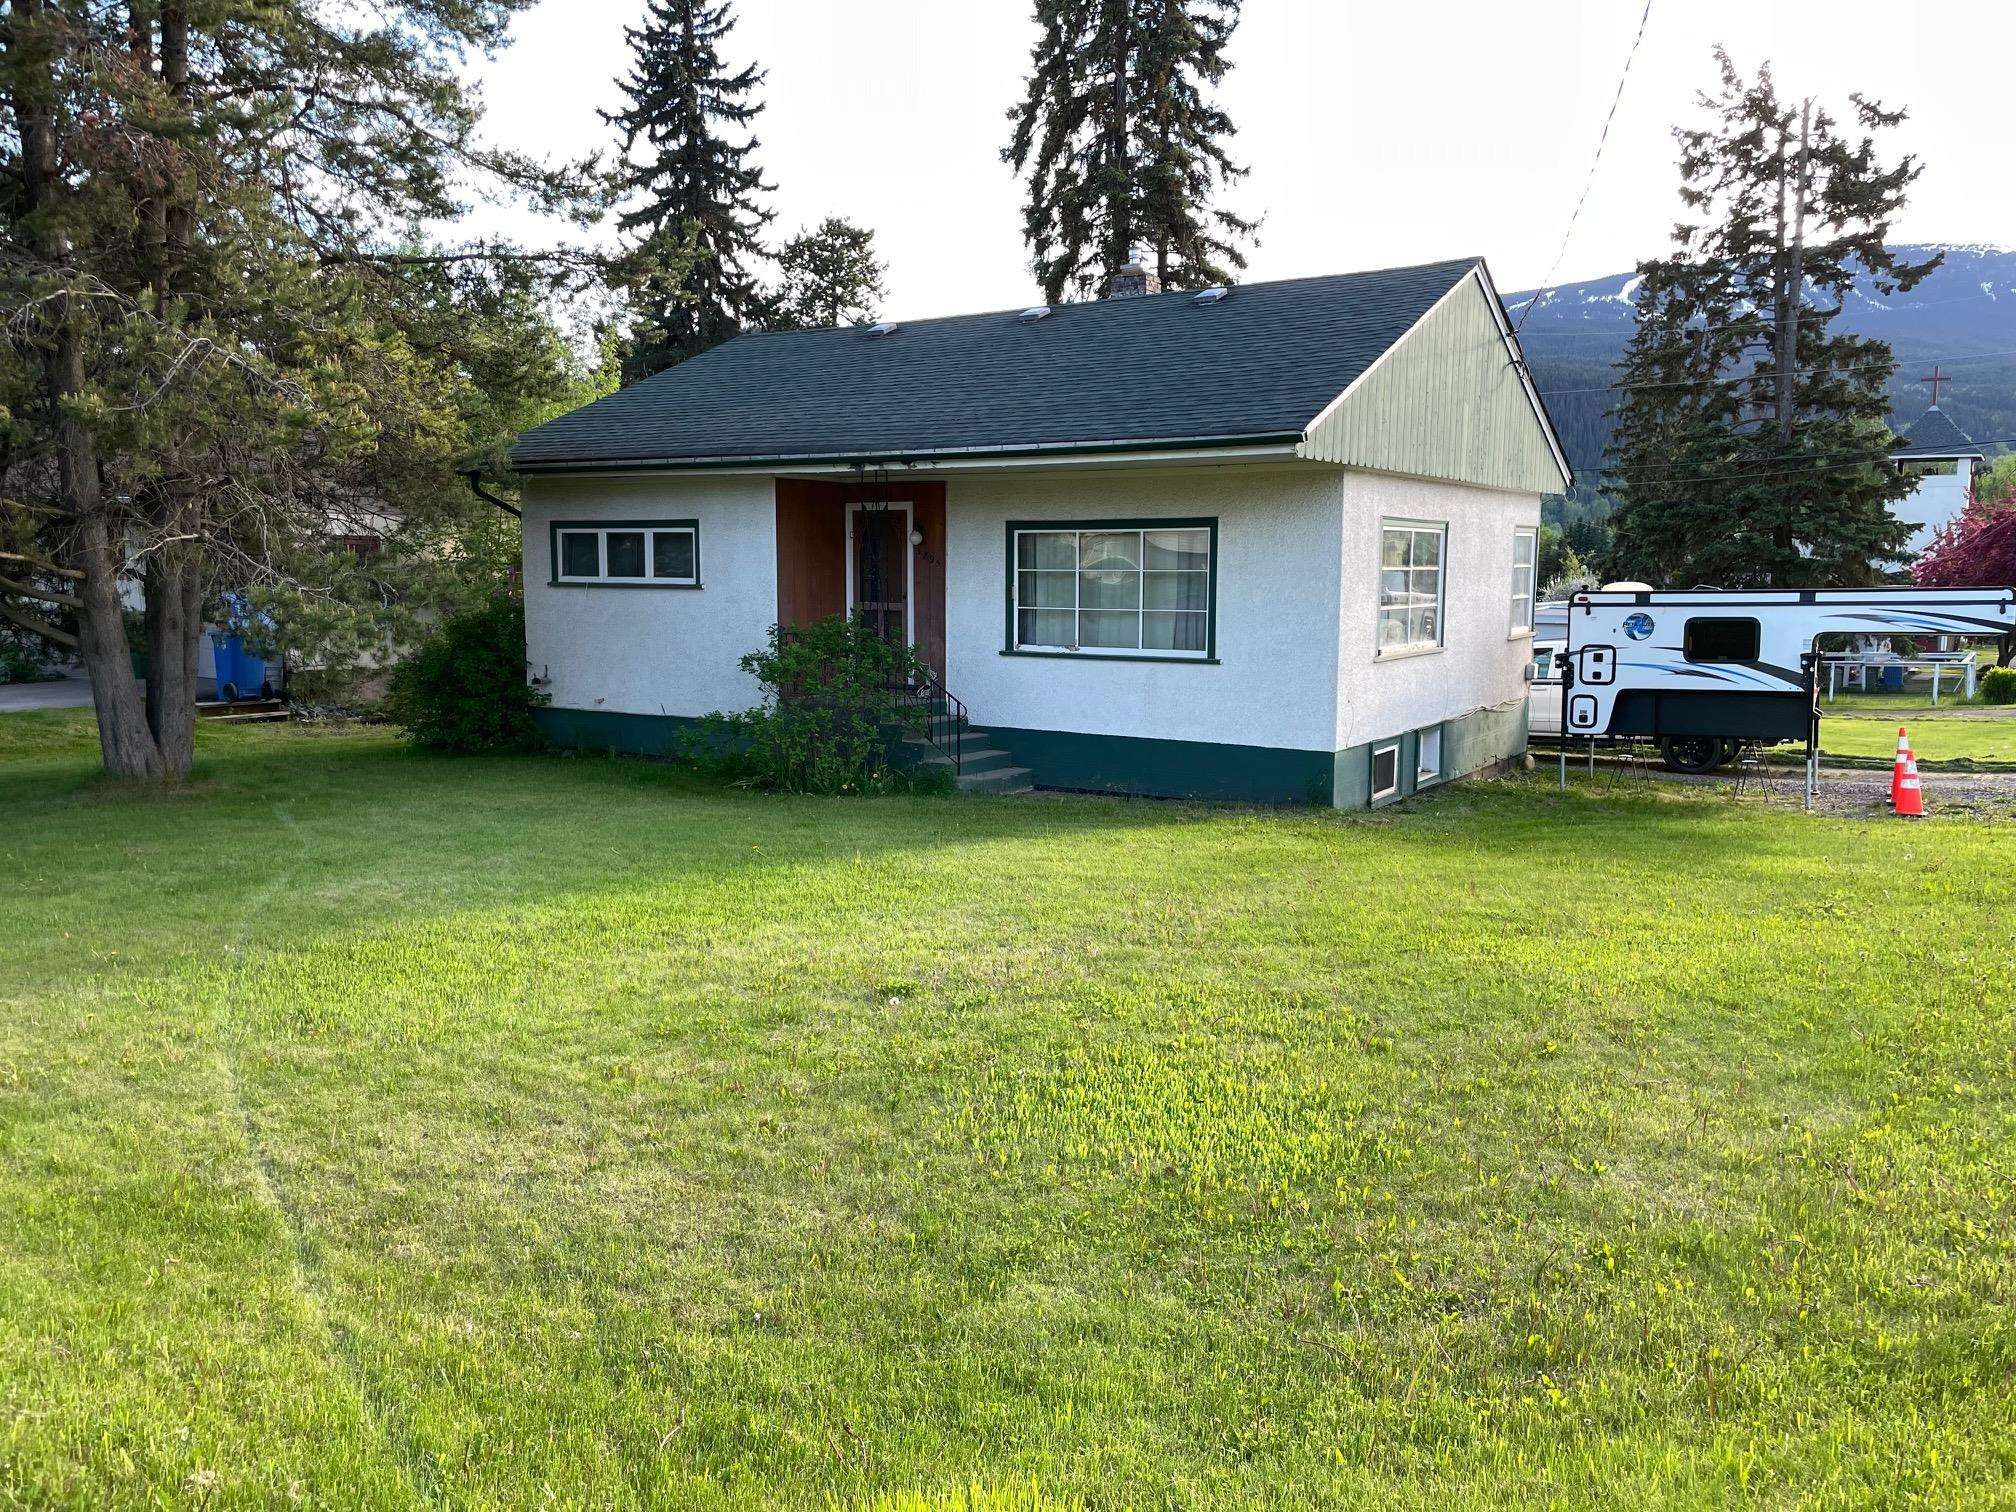 Mark this property at 3895 NINTH AVE in Smithers SOLD!